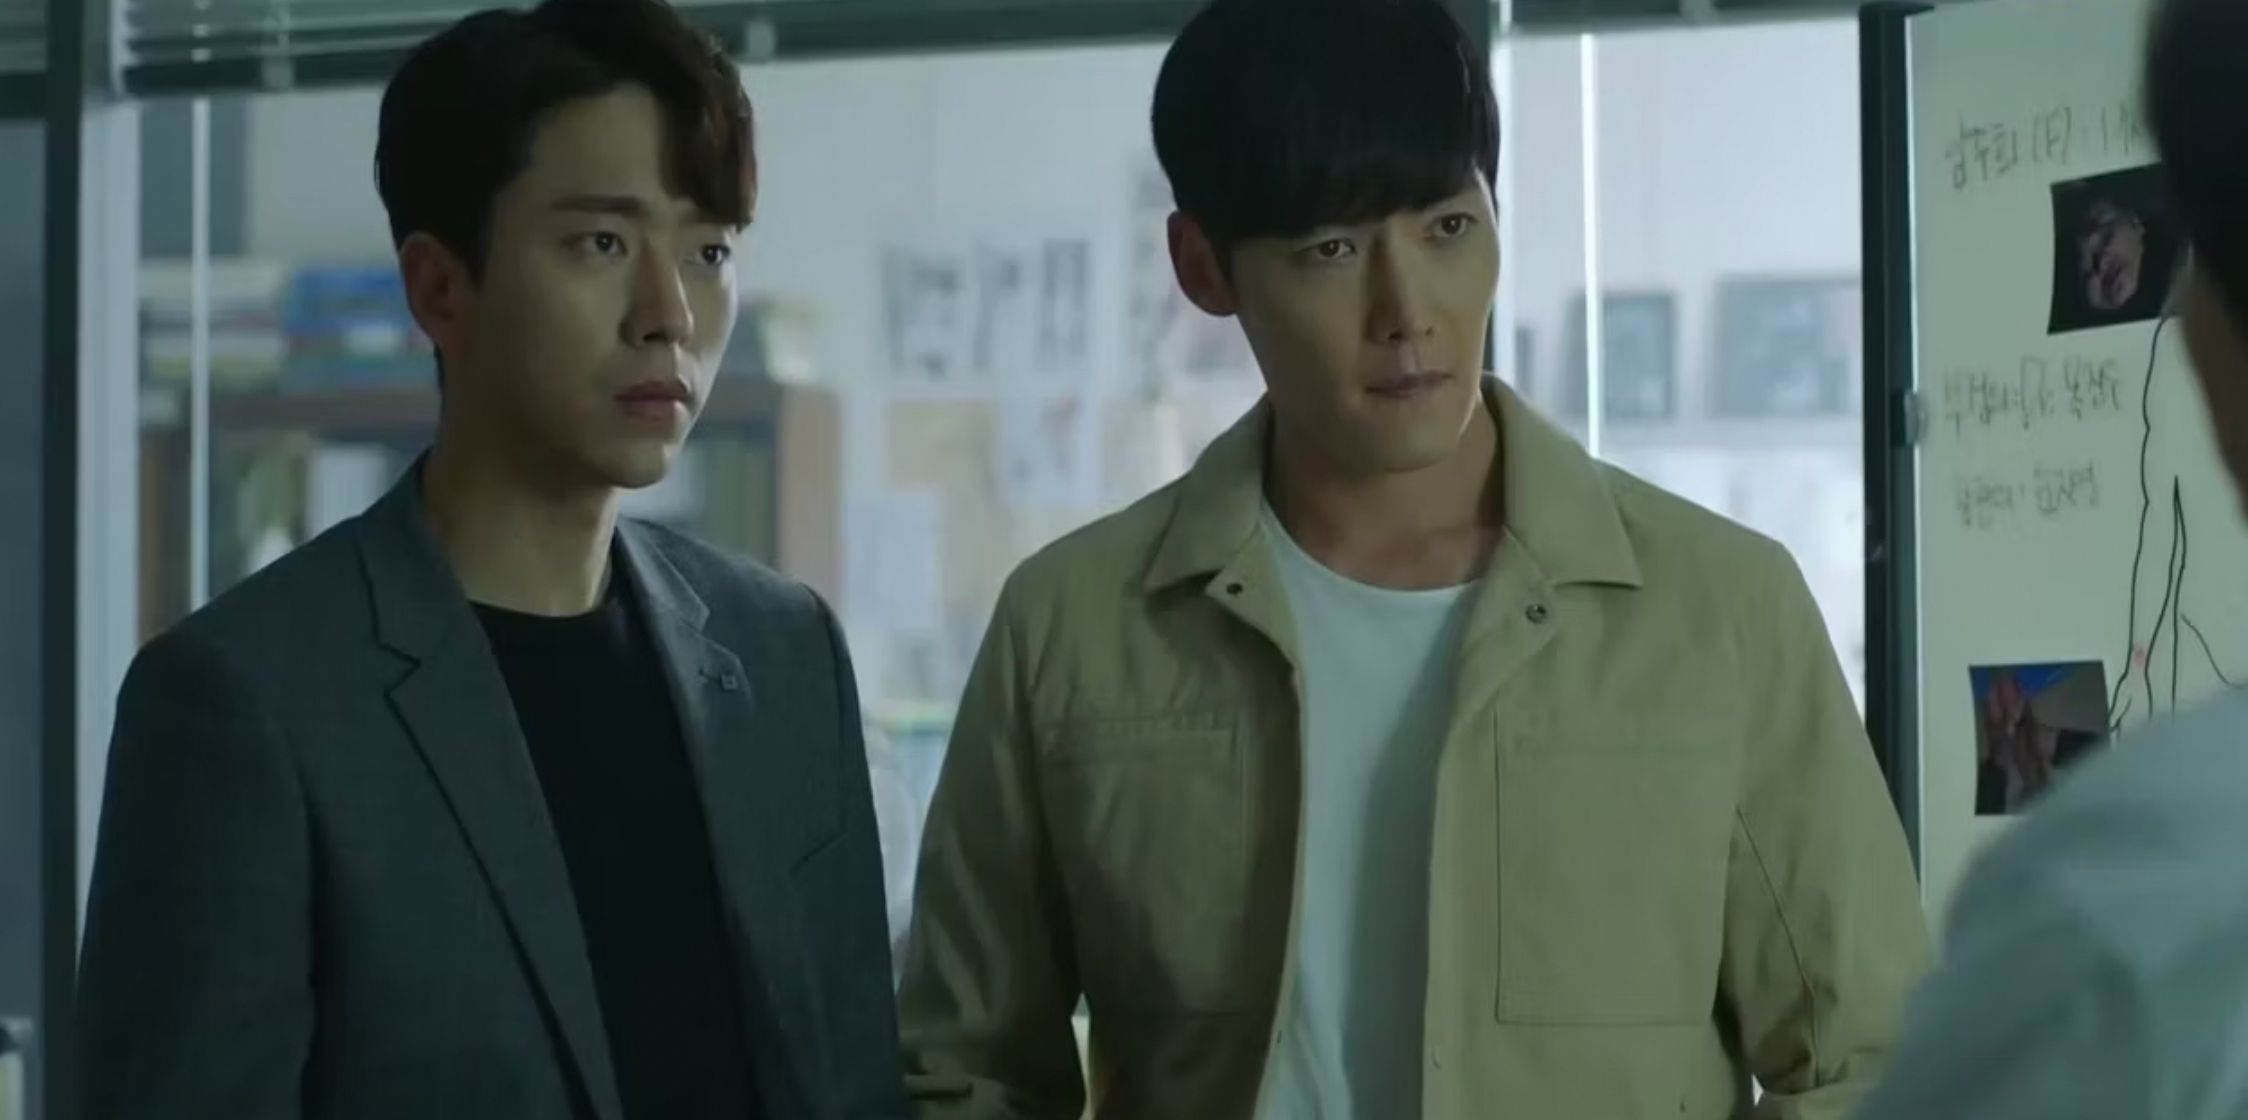 Two men listen attentively to someone else in the time travel Kdrama Tunnel